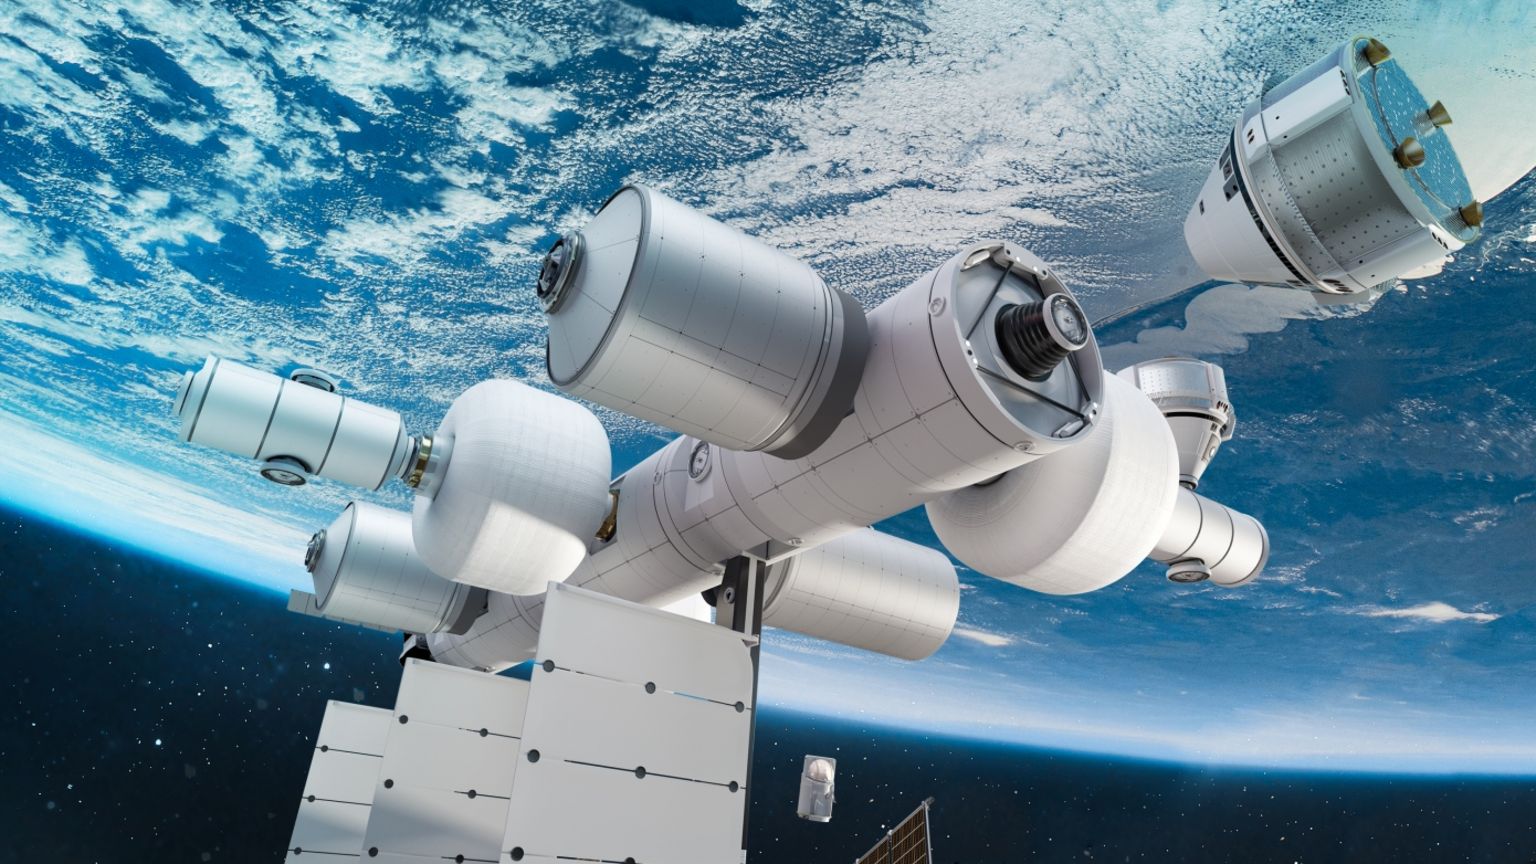 An artist's impression of the Orbital Reef space station.